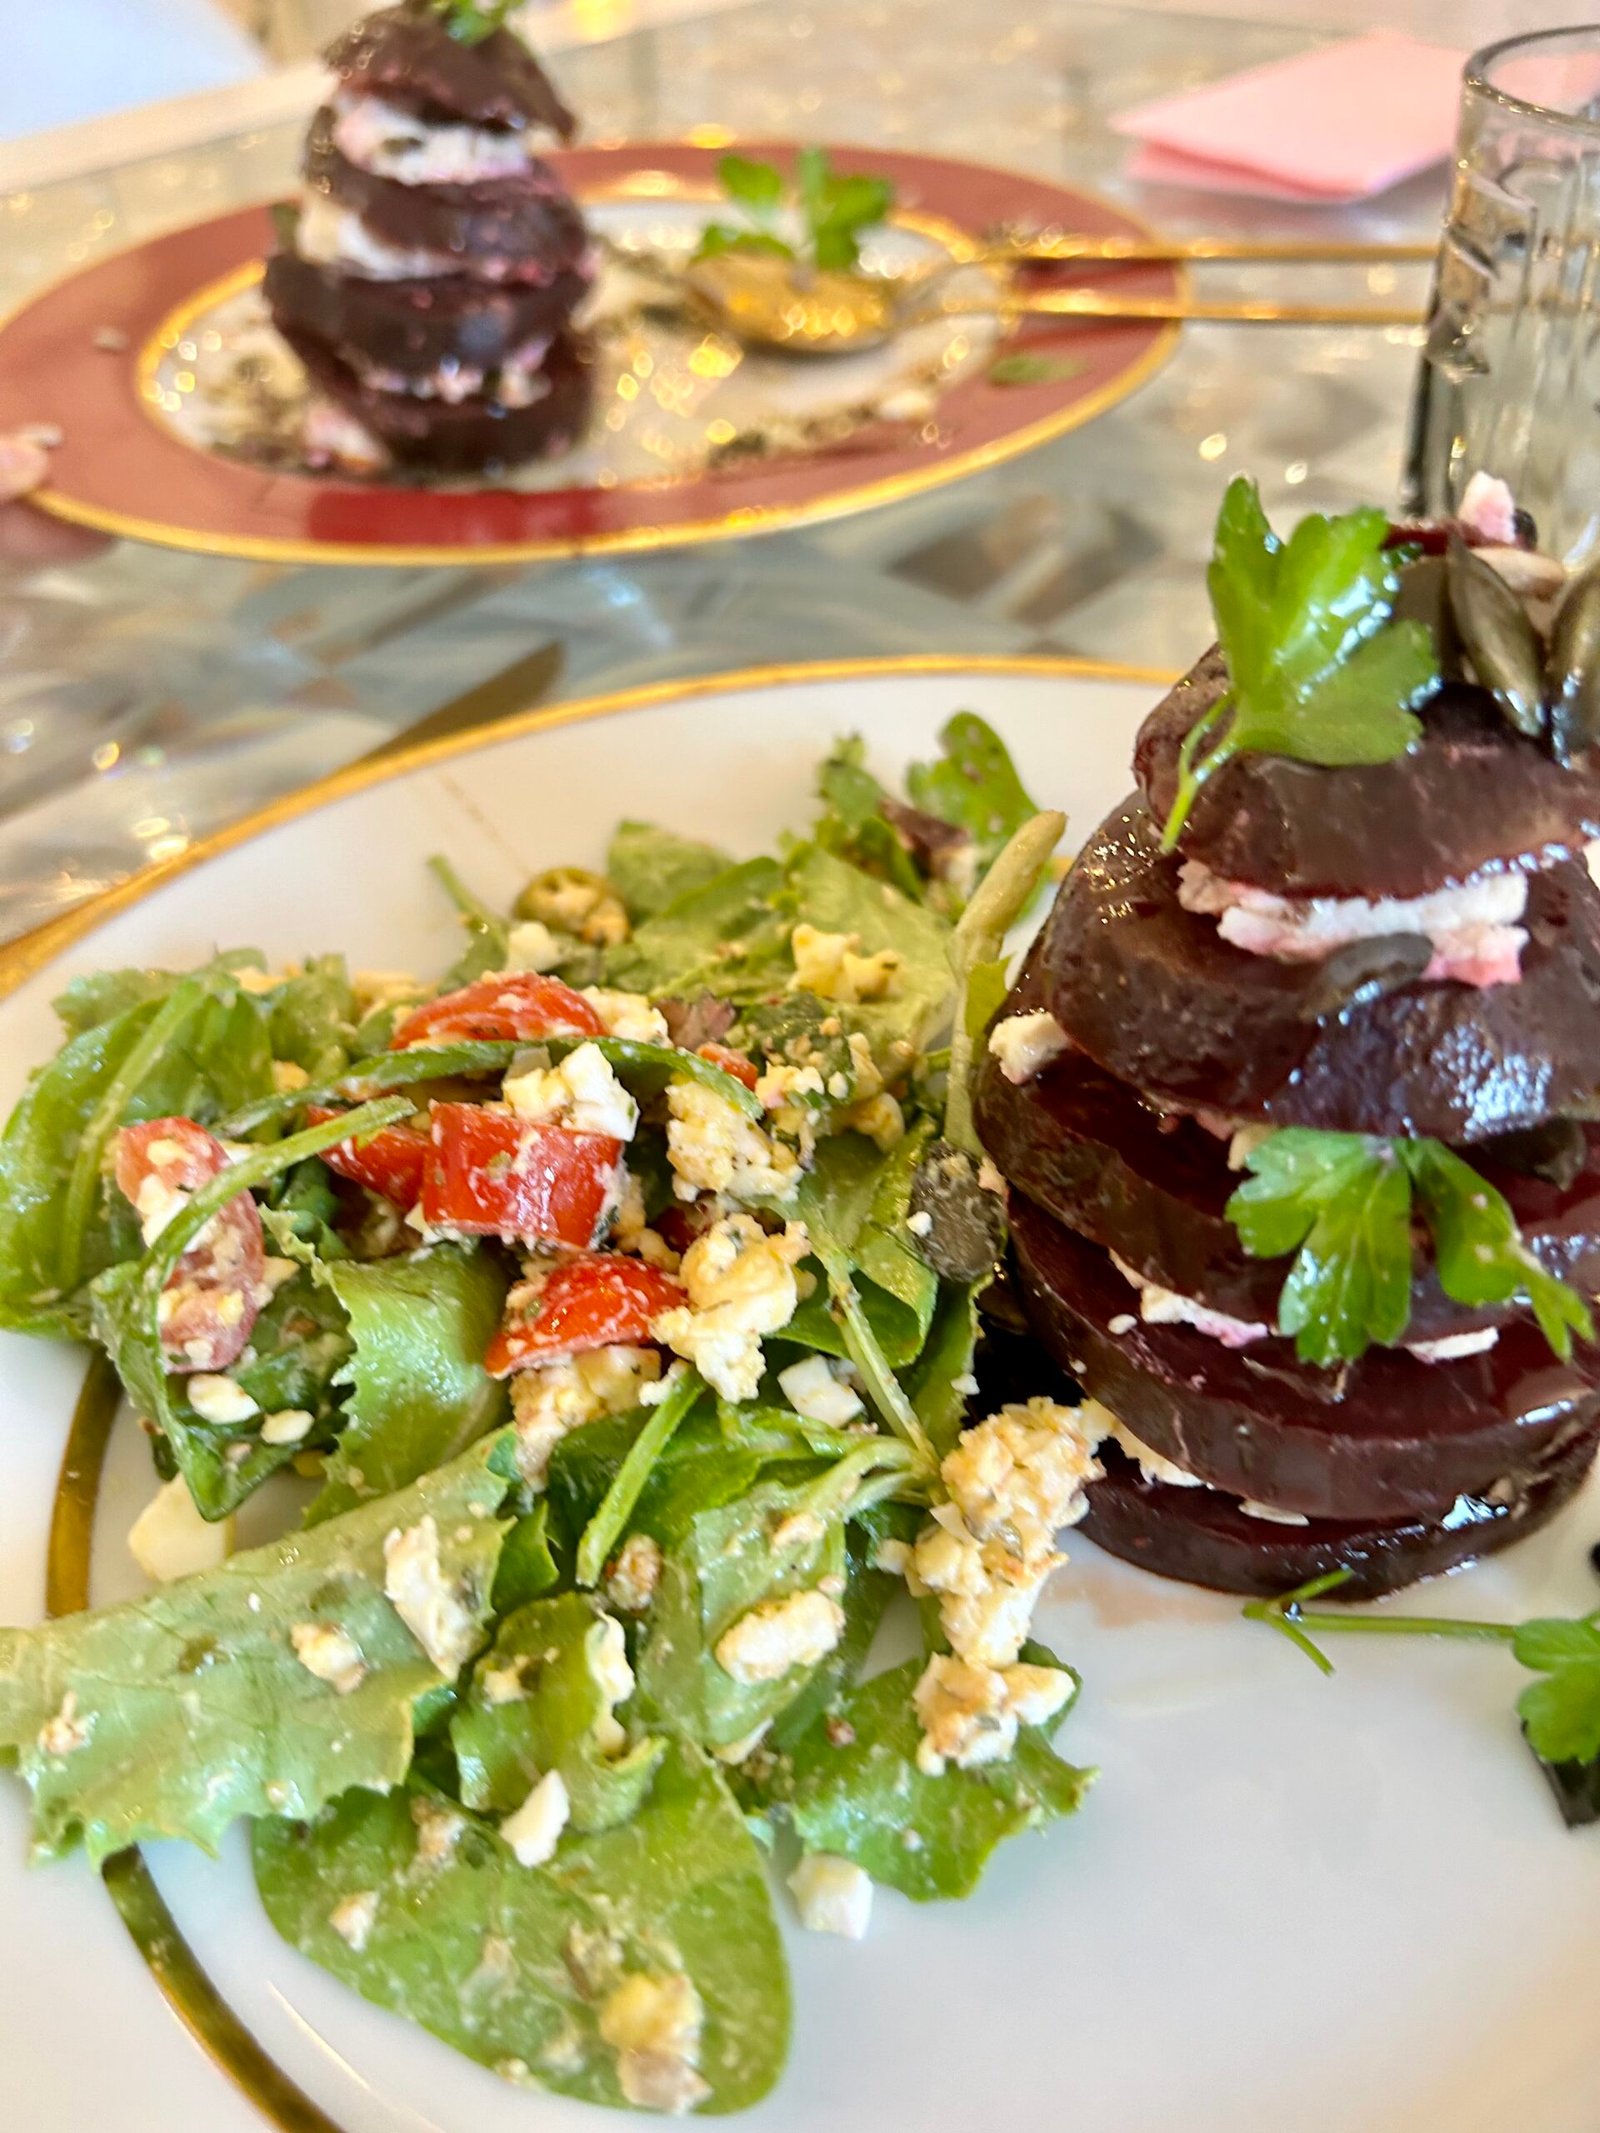 Brighten Your Christmas Table: Delicious Beet and Goat Cheese Salad